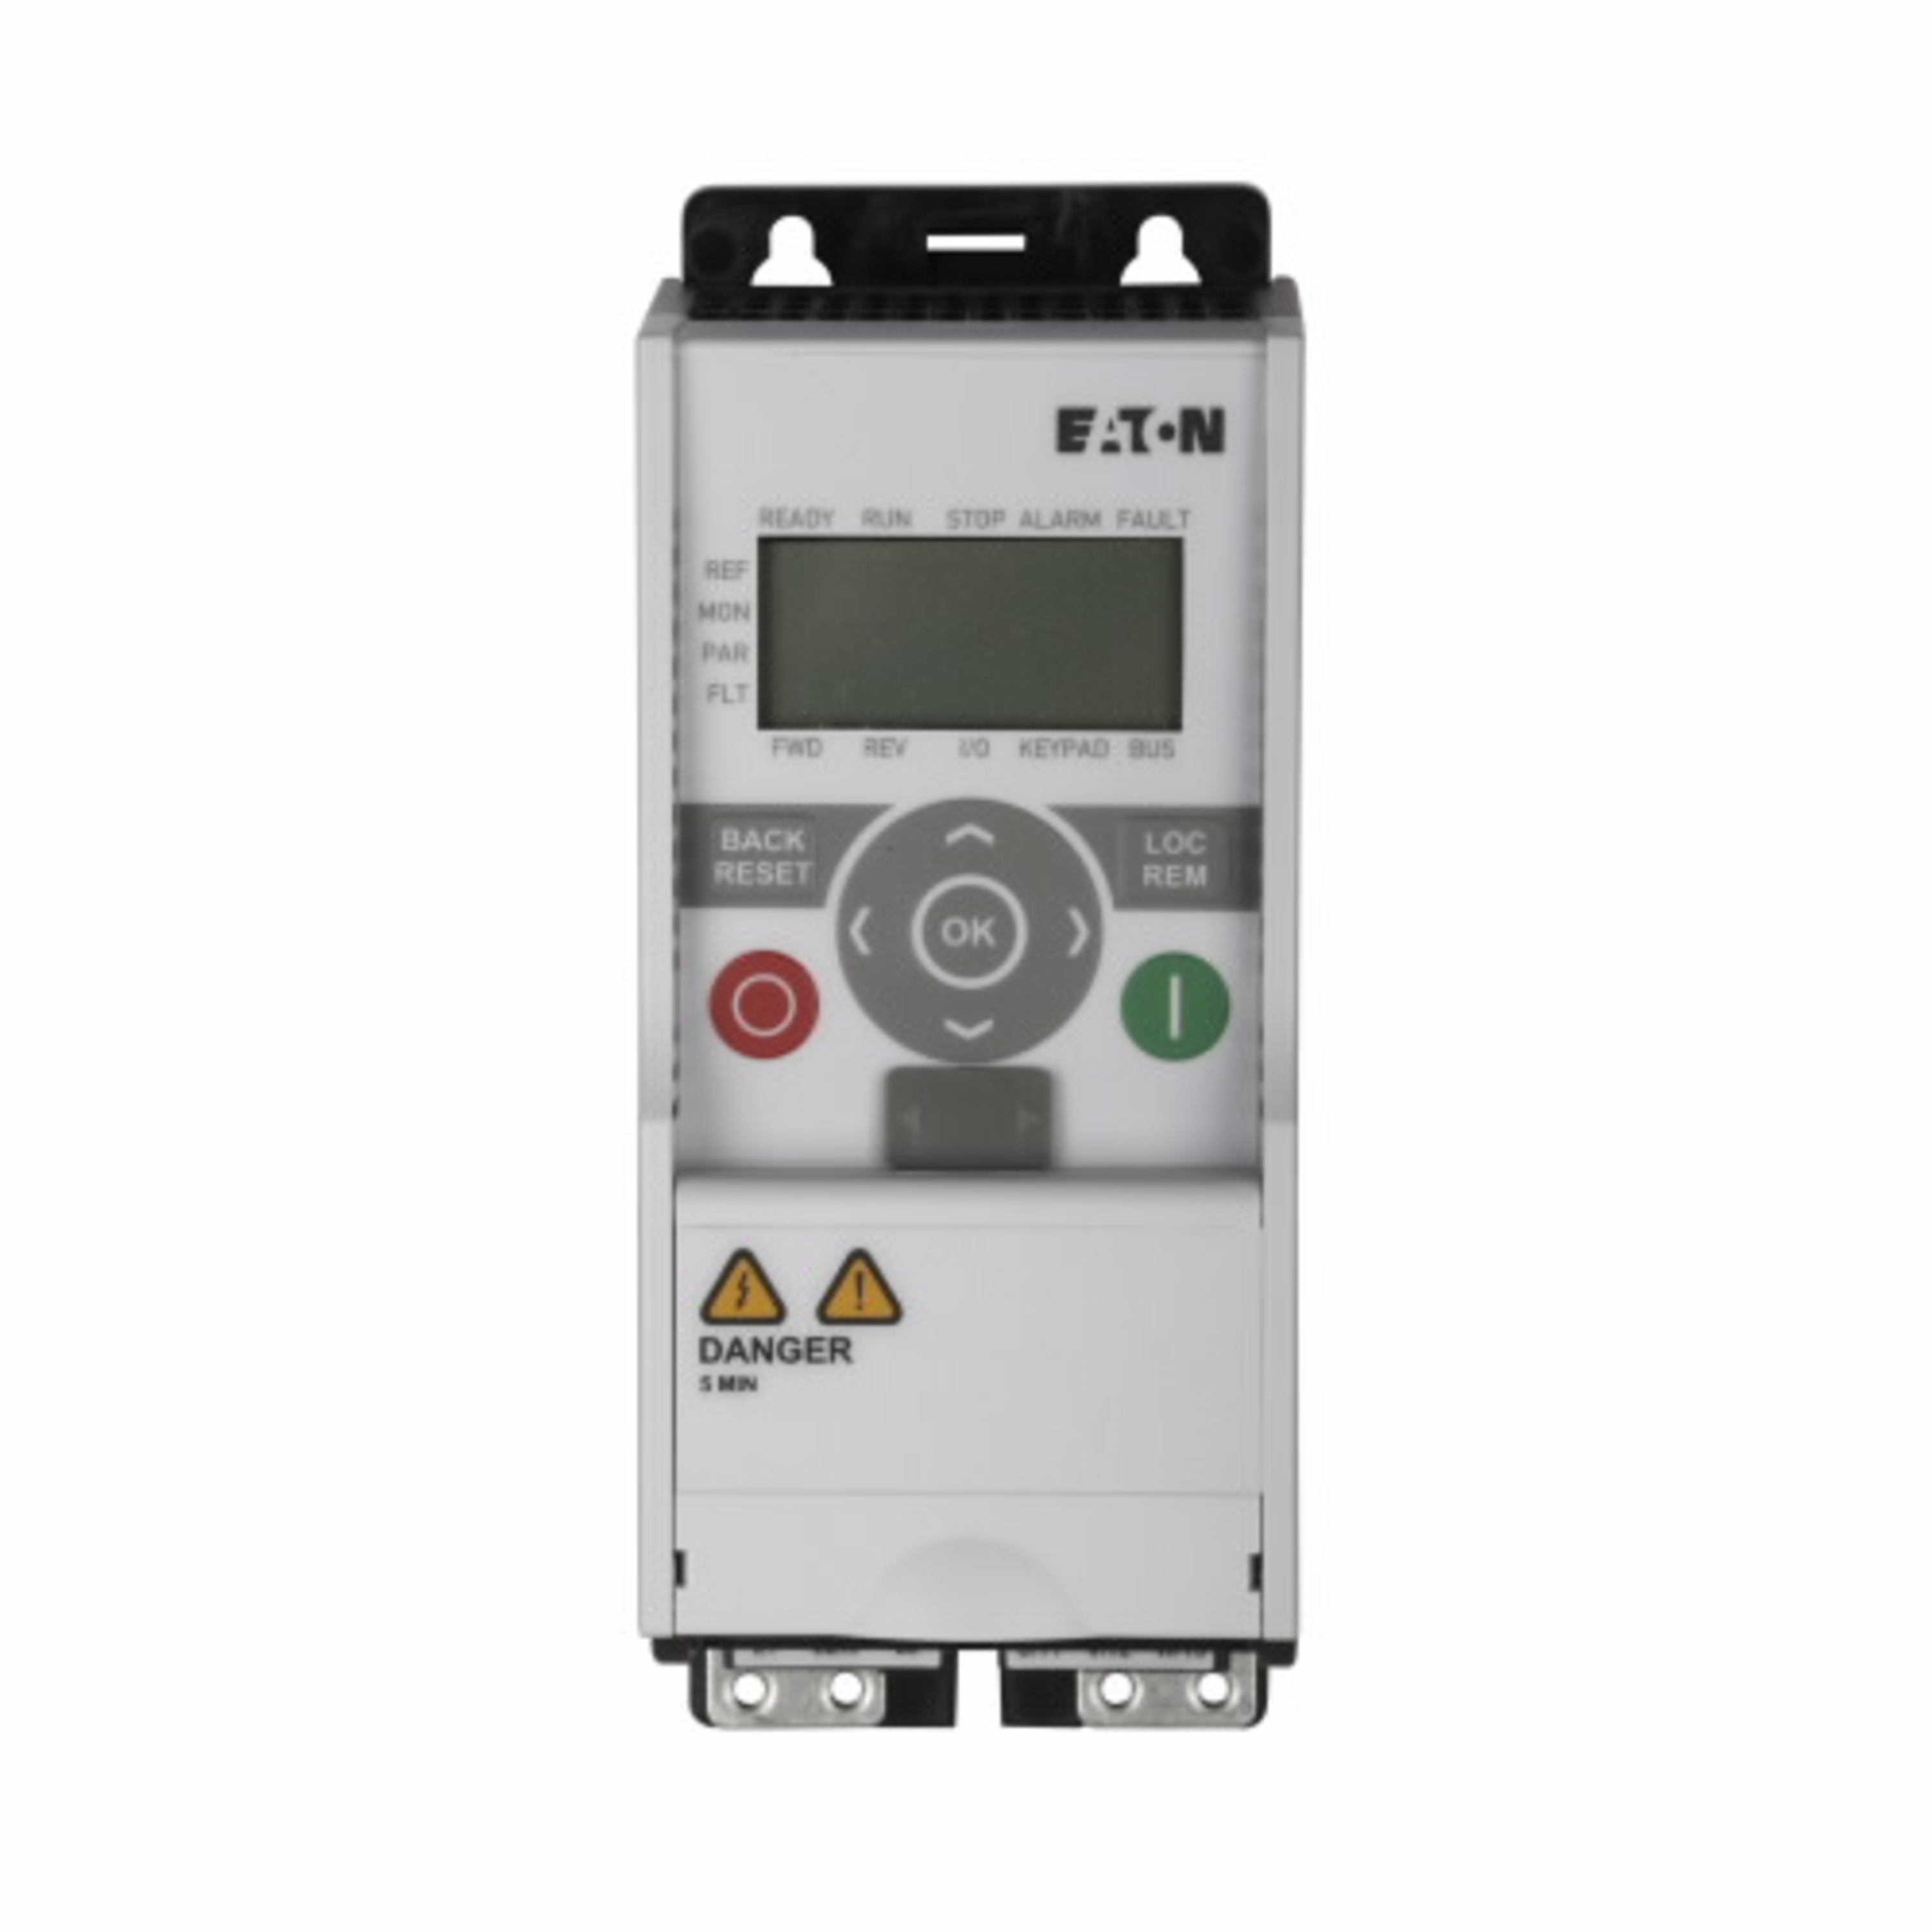 Eaton MMX12AA2D4N0-0 Eaton | Cutler Hammer MMX12AA2D4N0-0  Variable Frequency Drives AC Drives – 240VAC – 1 Phase https://gesrepair.com/wp-content/uploads/2022/Eaton/Images/Eaton_MMX12AA2D4N0-0_Variable_Frequency_Drive.jpg